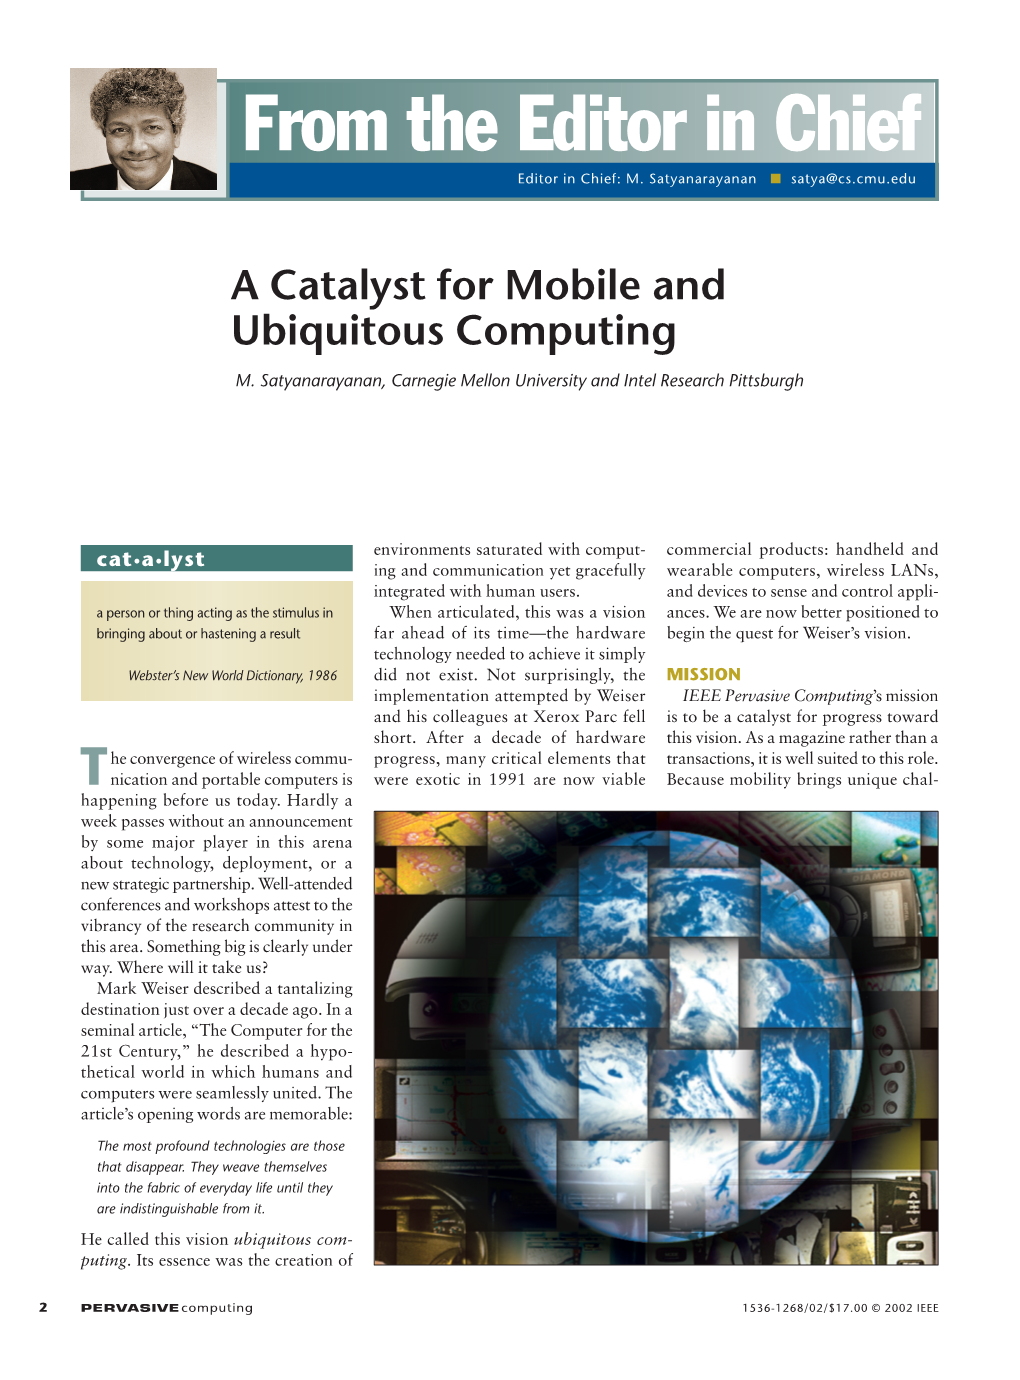 A Catalyst for Mobile and Ubiquitous Computing